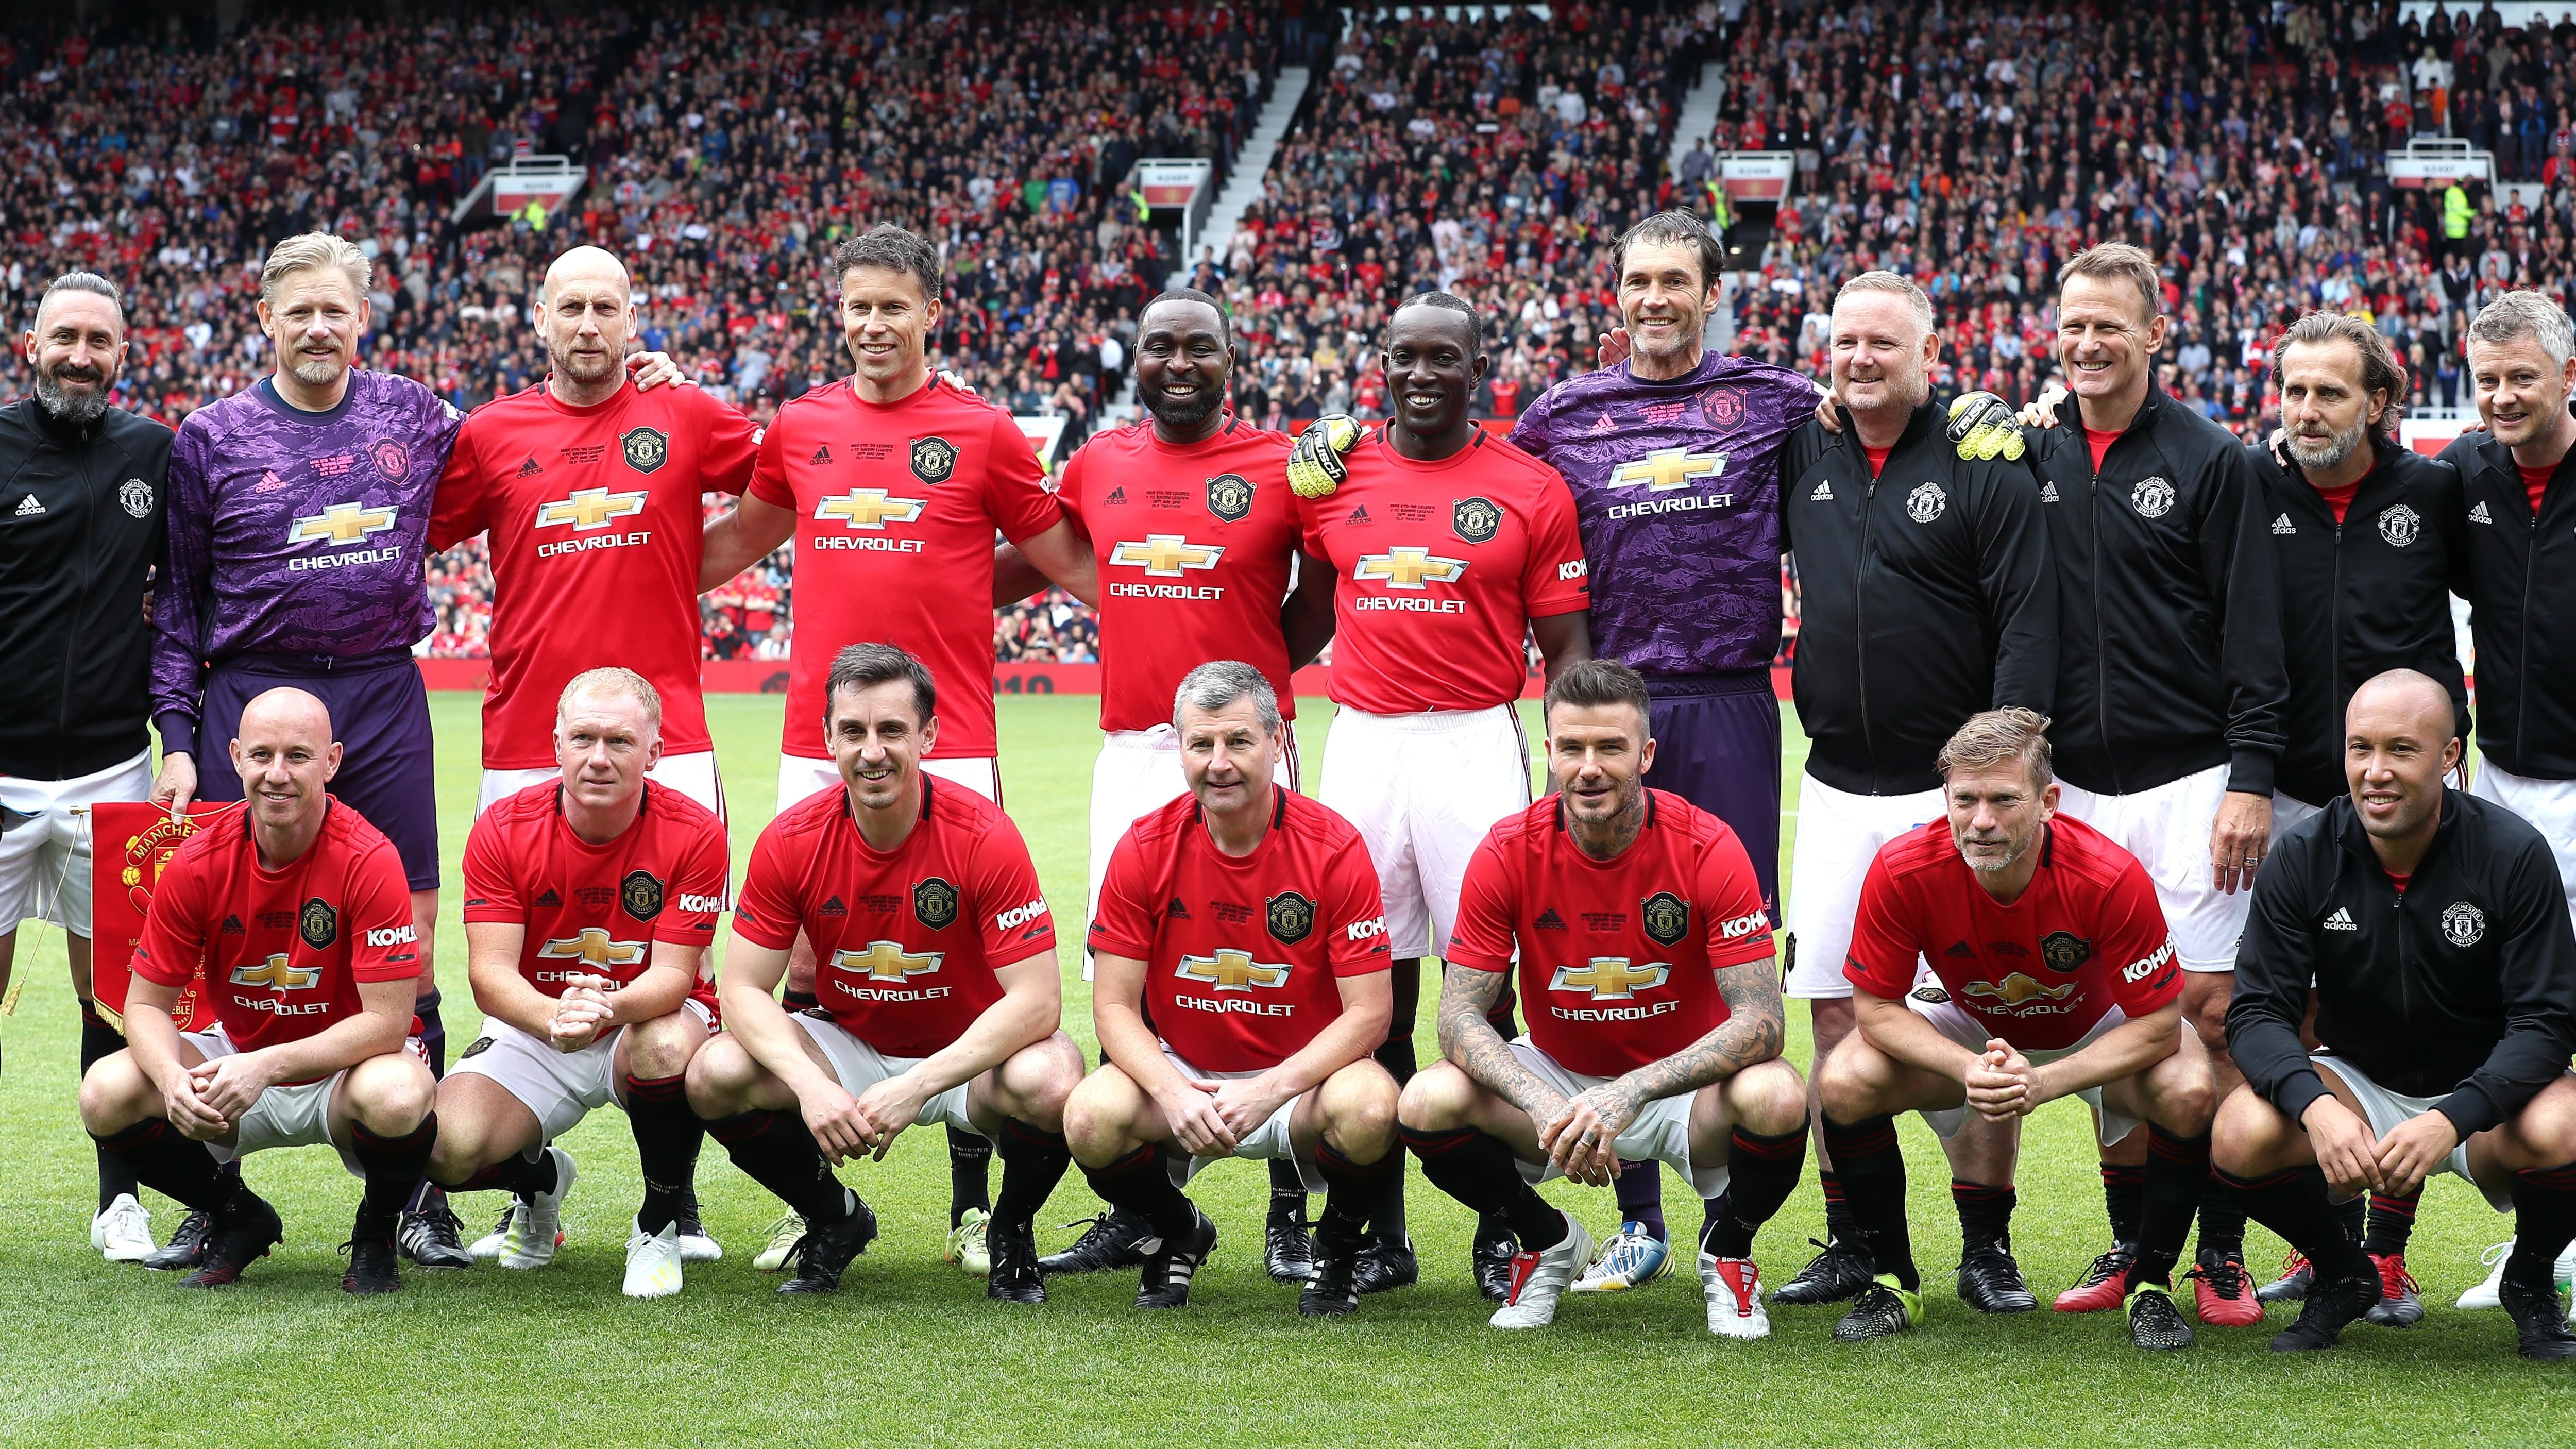 Manchester United’s treble winners met for a match against Bayern Munich on the 20th anniversary